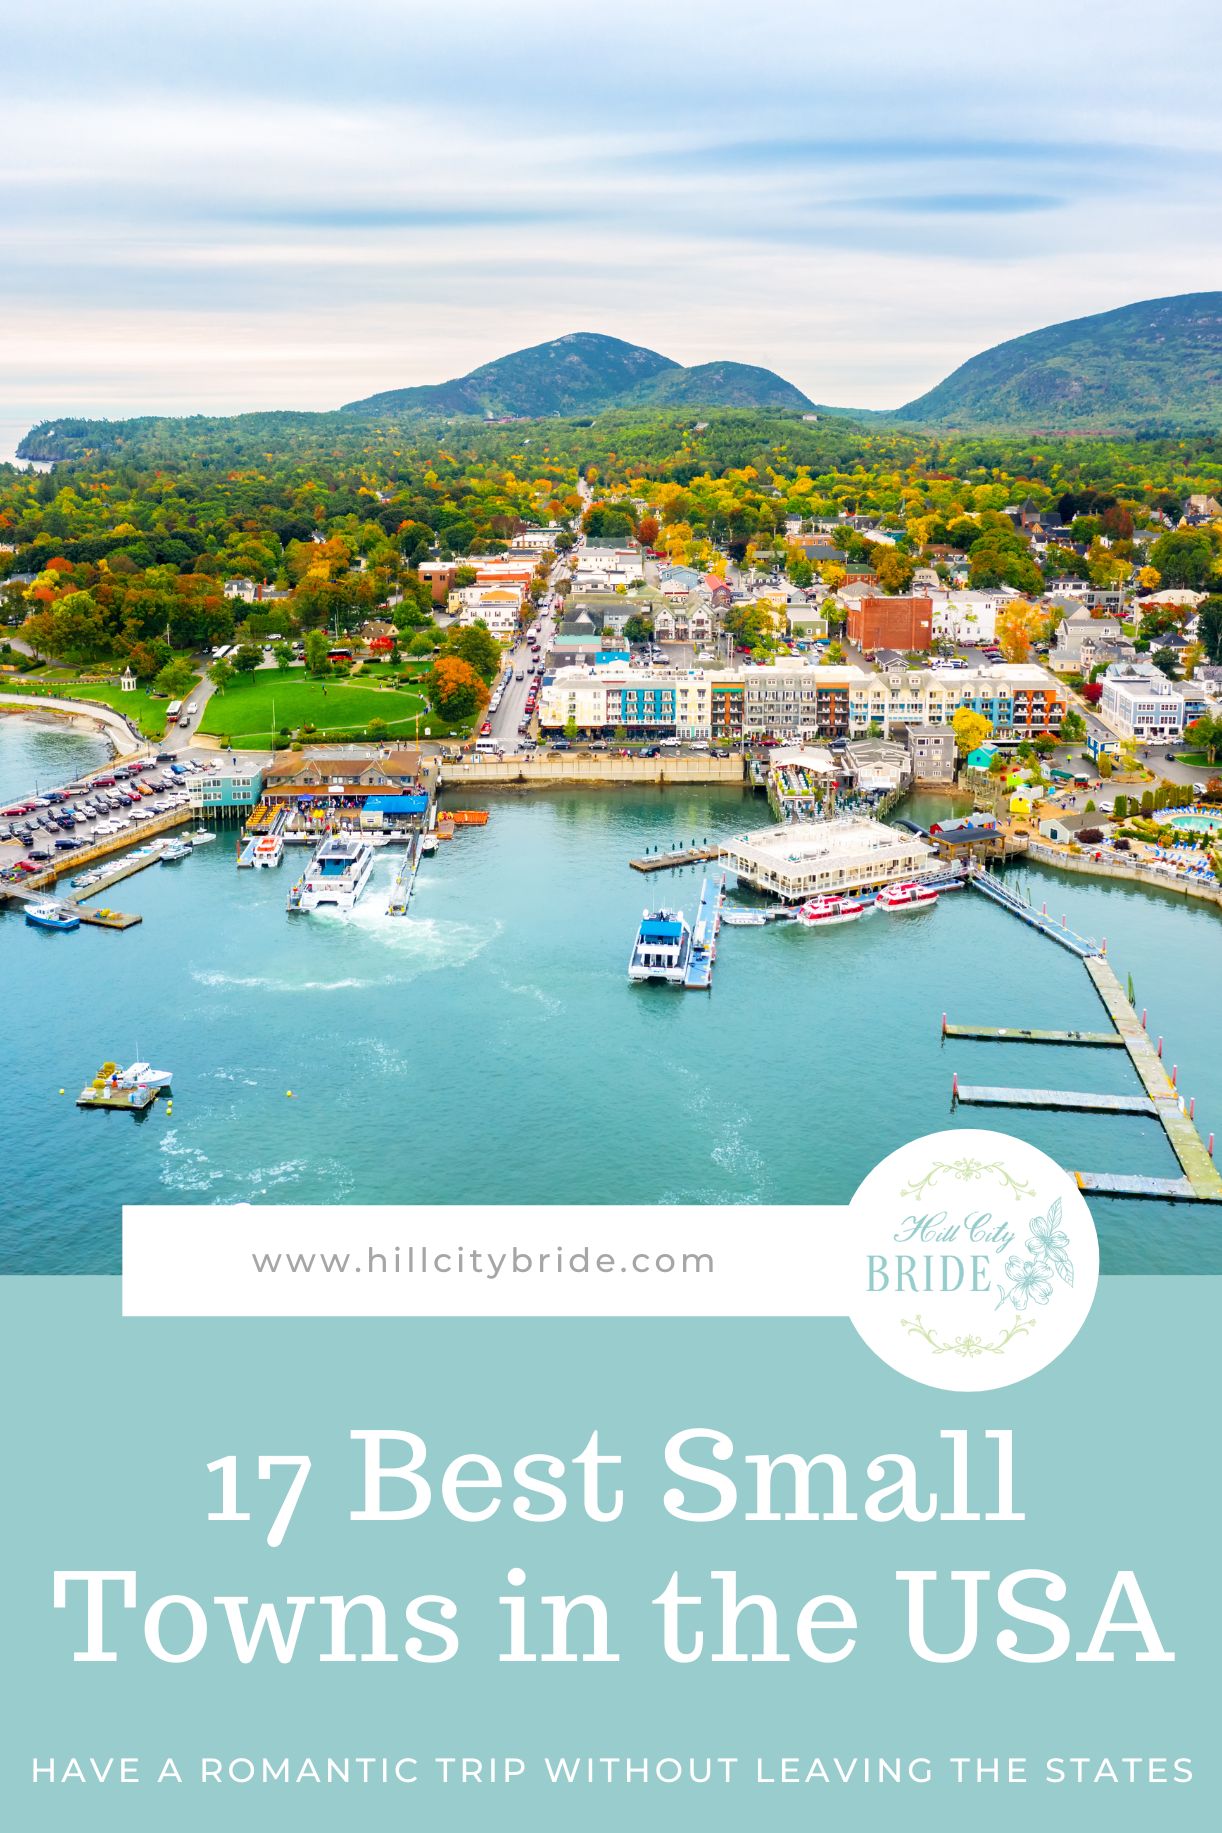 Best Small Towns in the USA